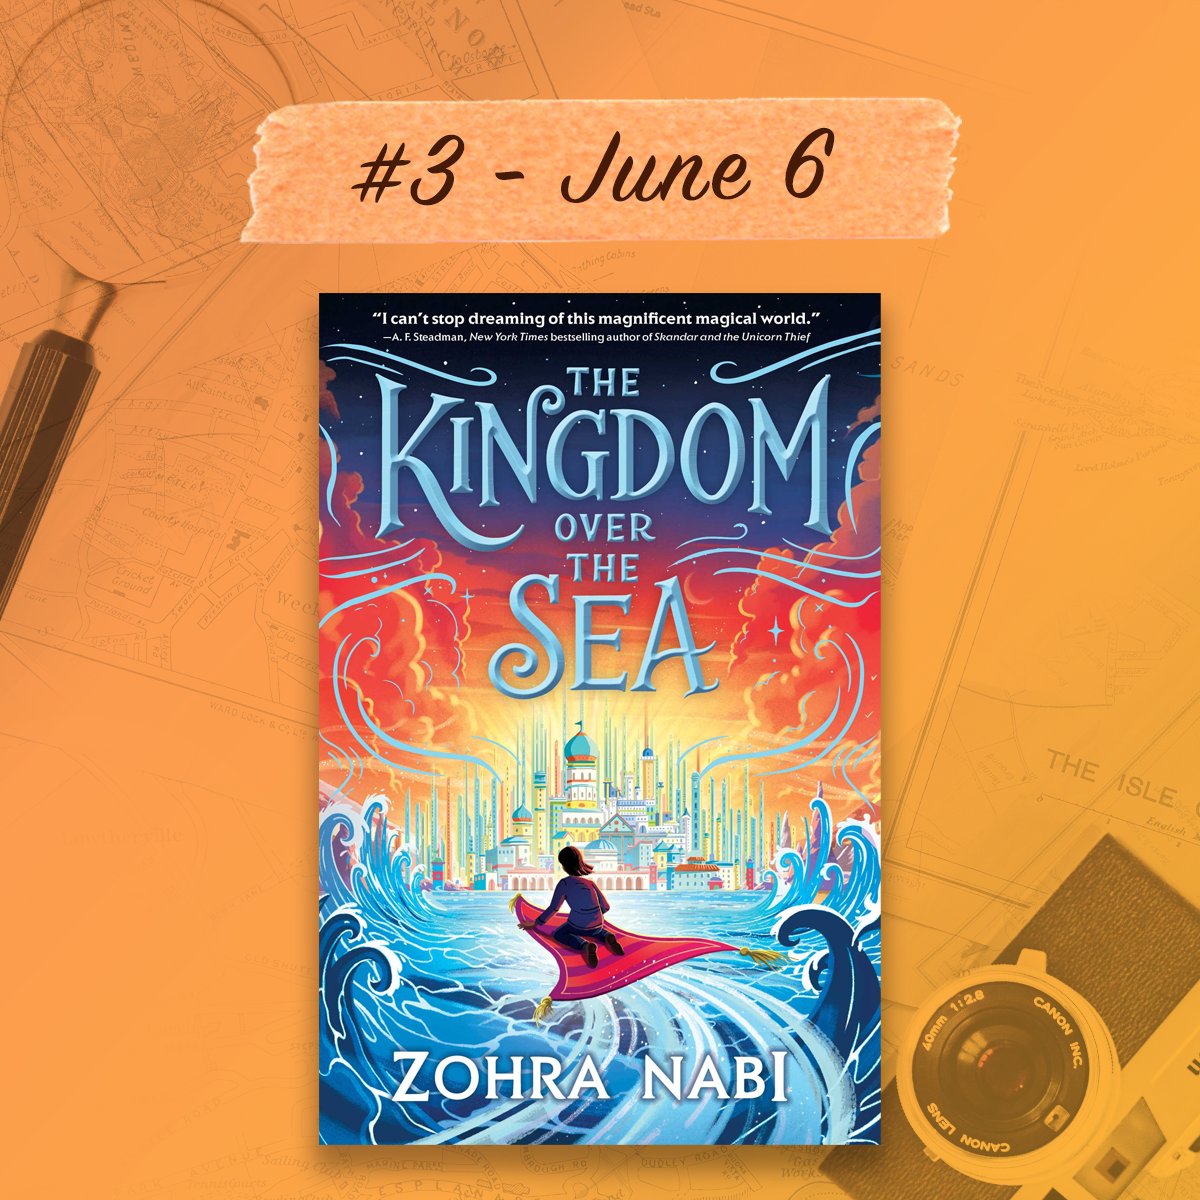 ✨THE KINGDOM OVER THE SEA by @Zohra3Nabi (June 6) - A 12-year-old must travel to a mystical land of sorceresses, alchemists, jinn, and flying carpets to discover her heritage and fulfill her destiny: ow.ly/f5zG50OEnrg